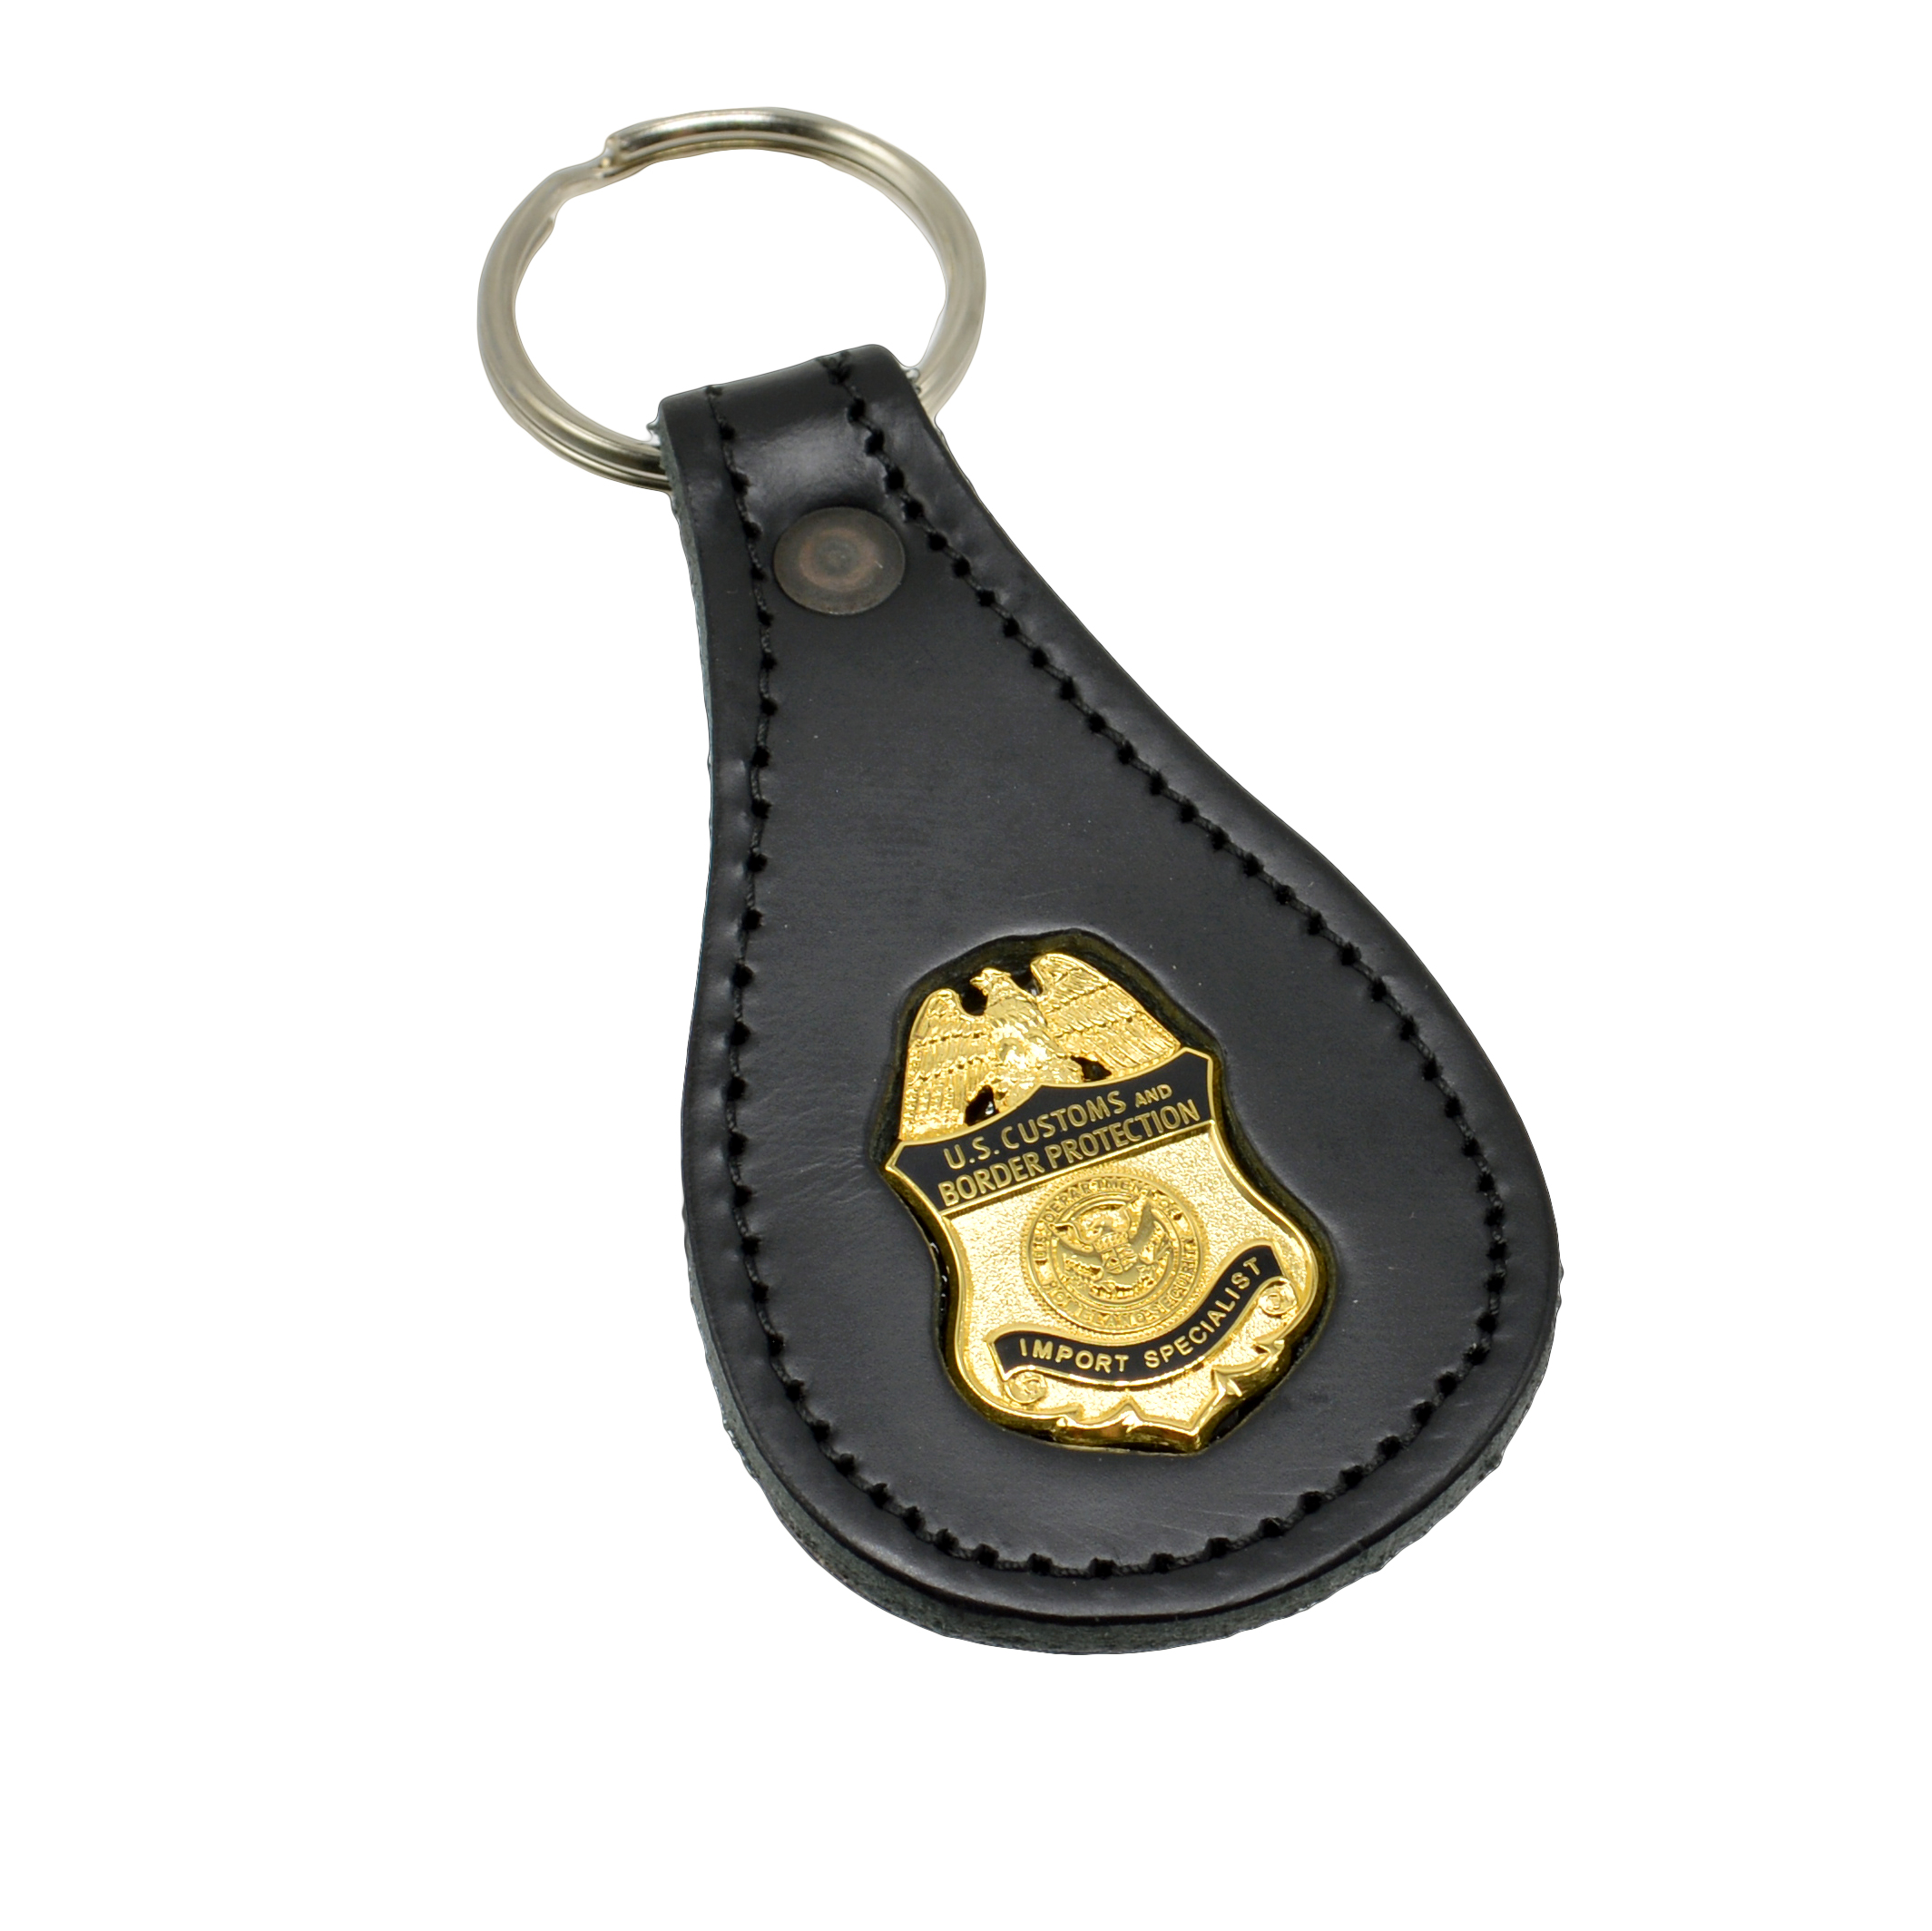 Specialist ID Super Heavy Duty Retractable Keychain